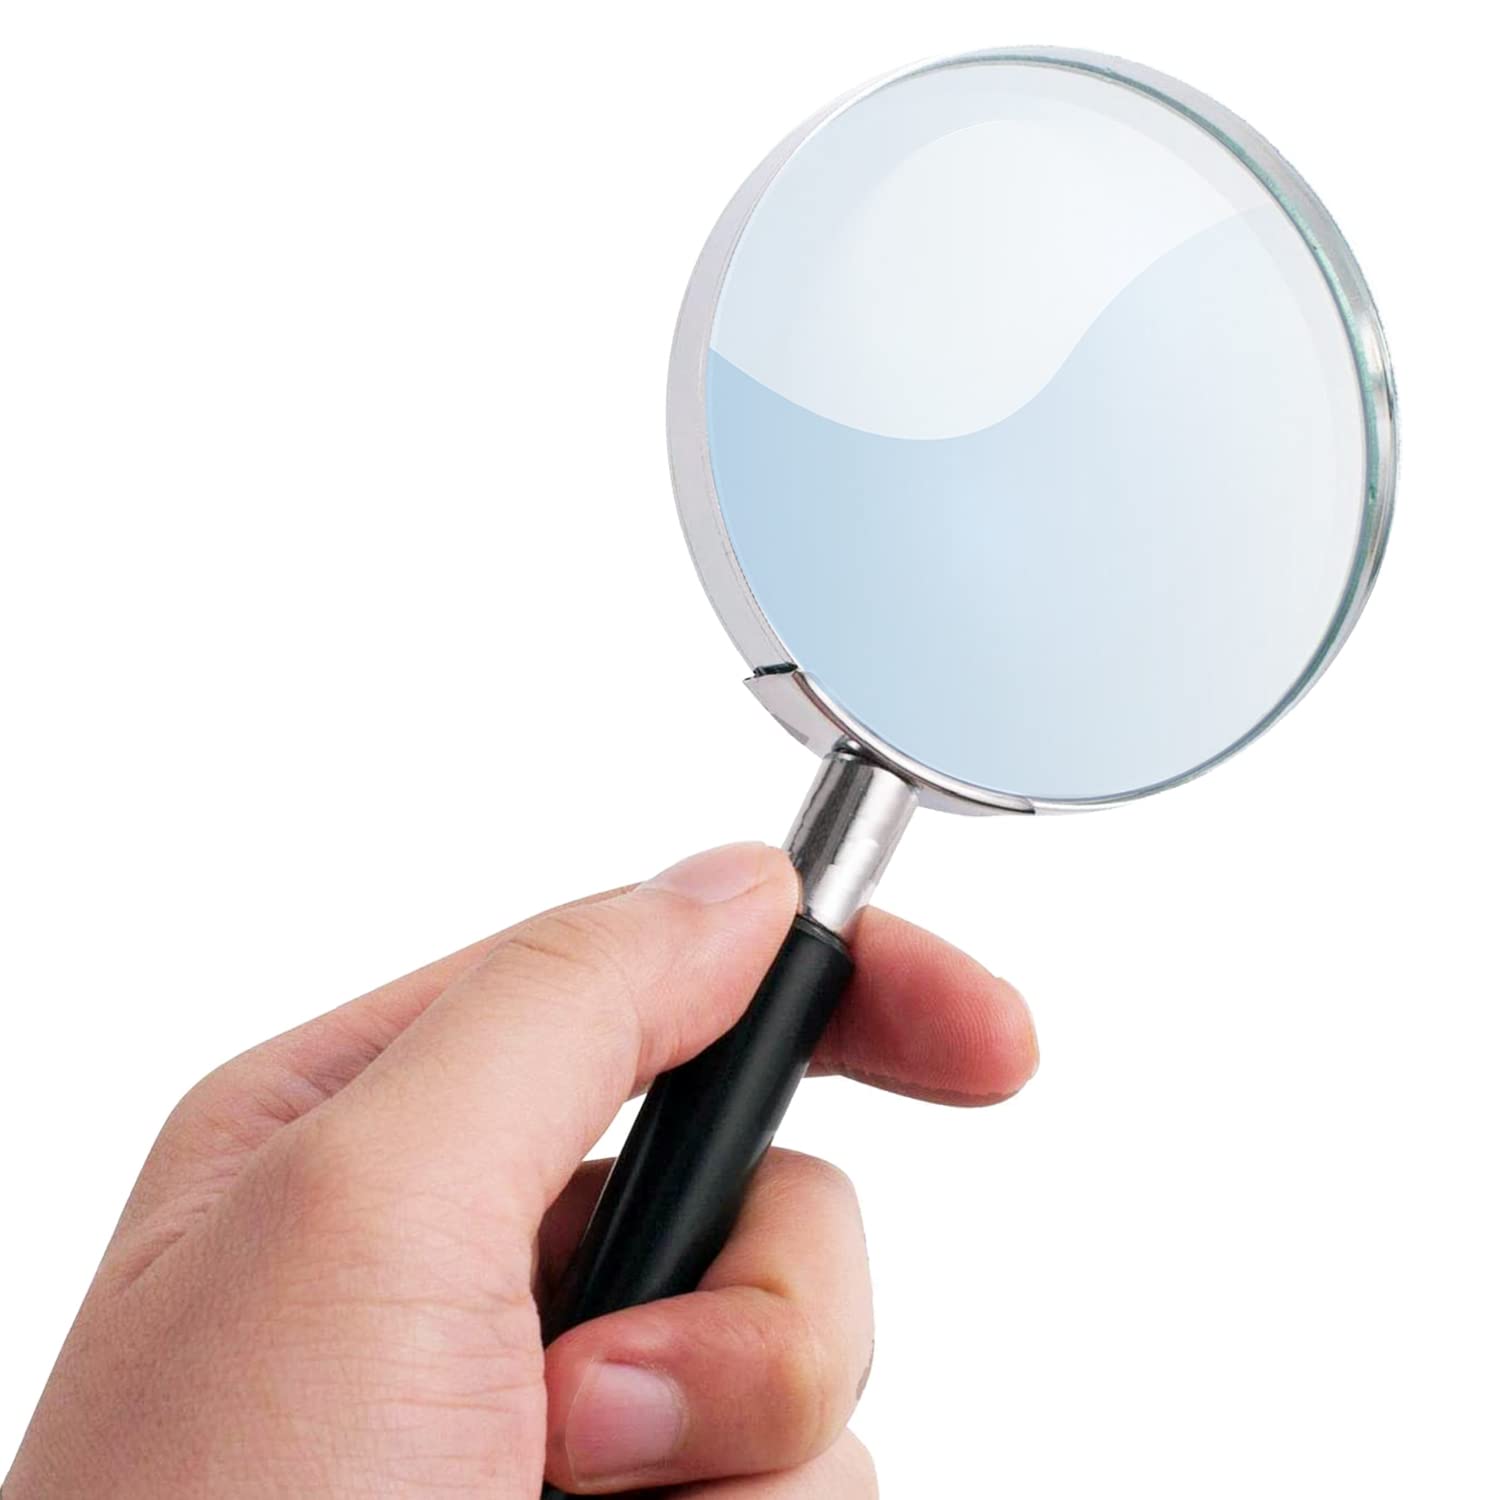 Uses of Convex Lens and Types - Magnifying Glass, Microscope